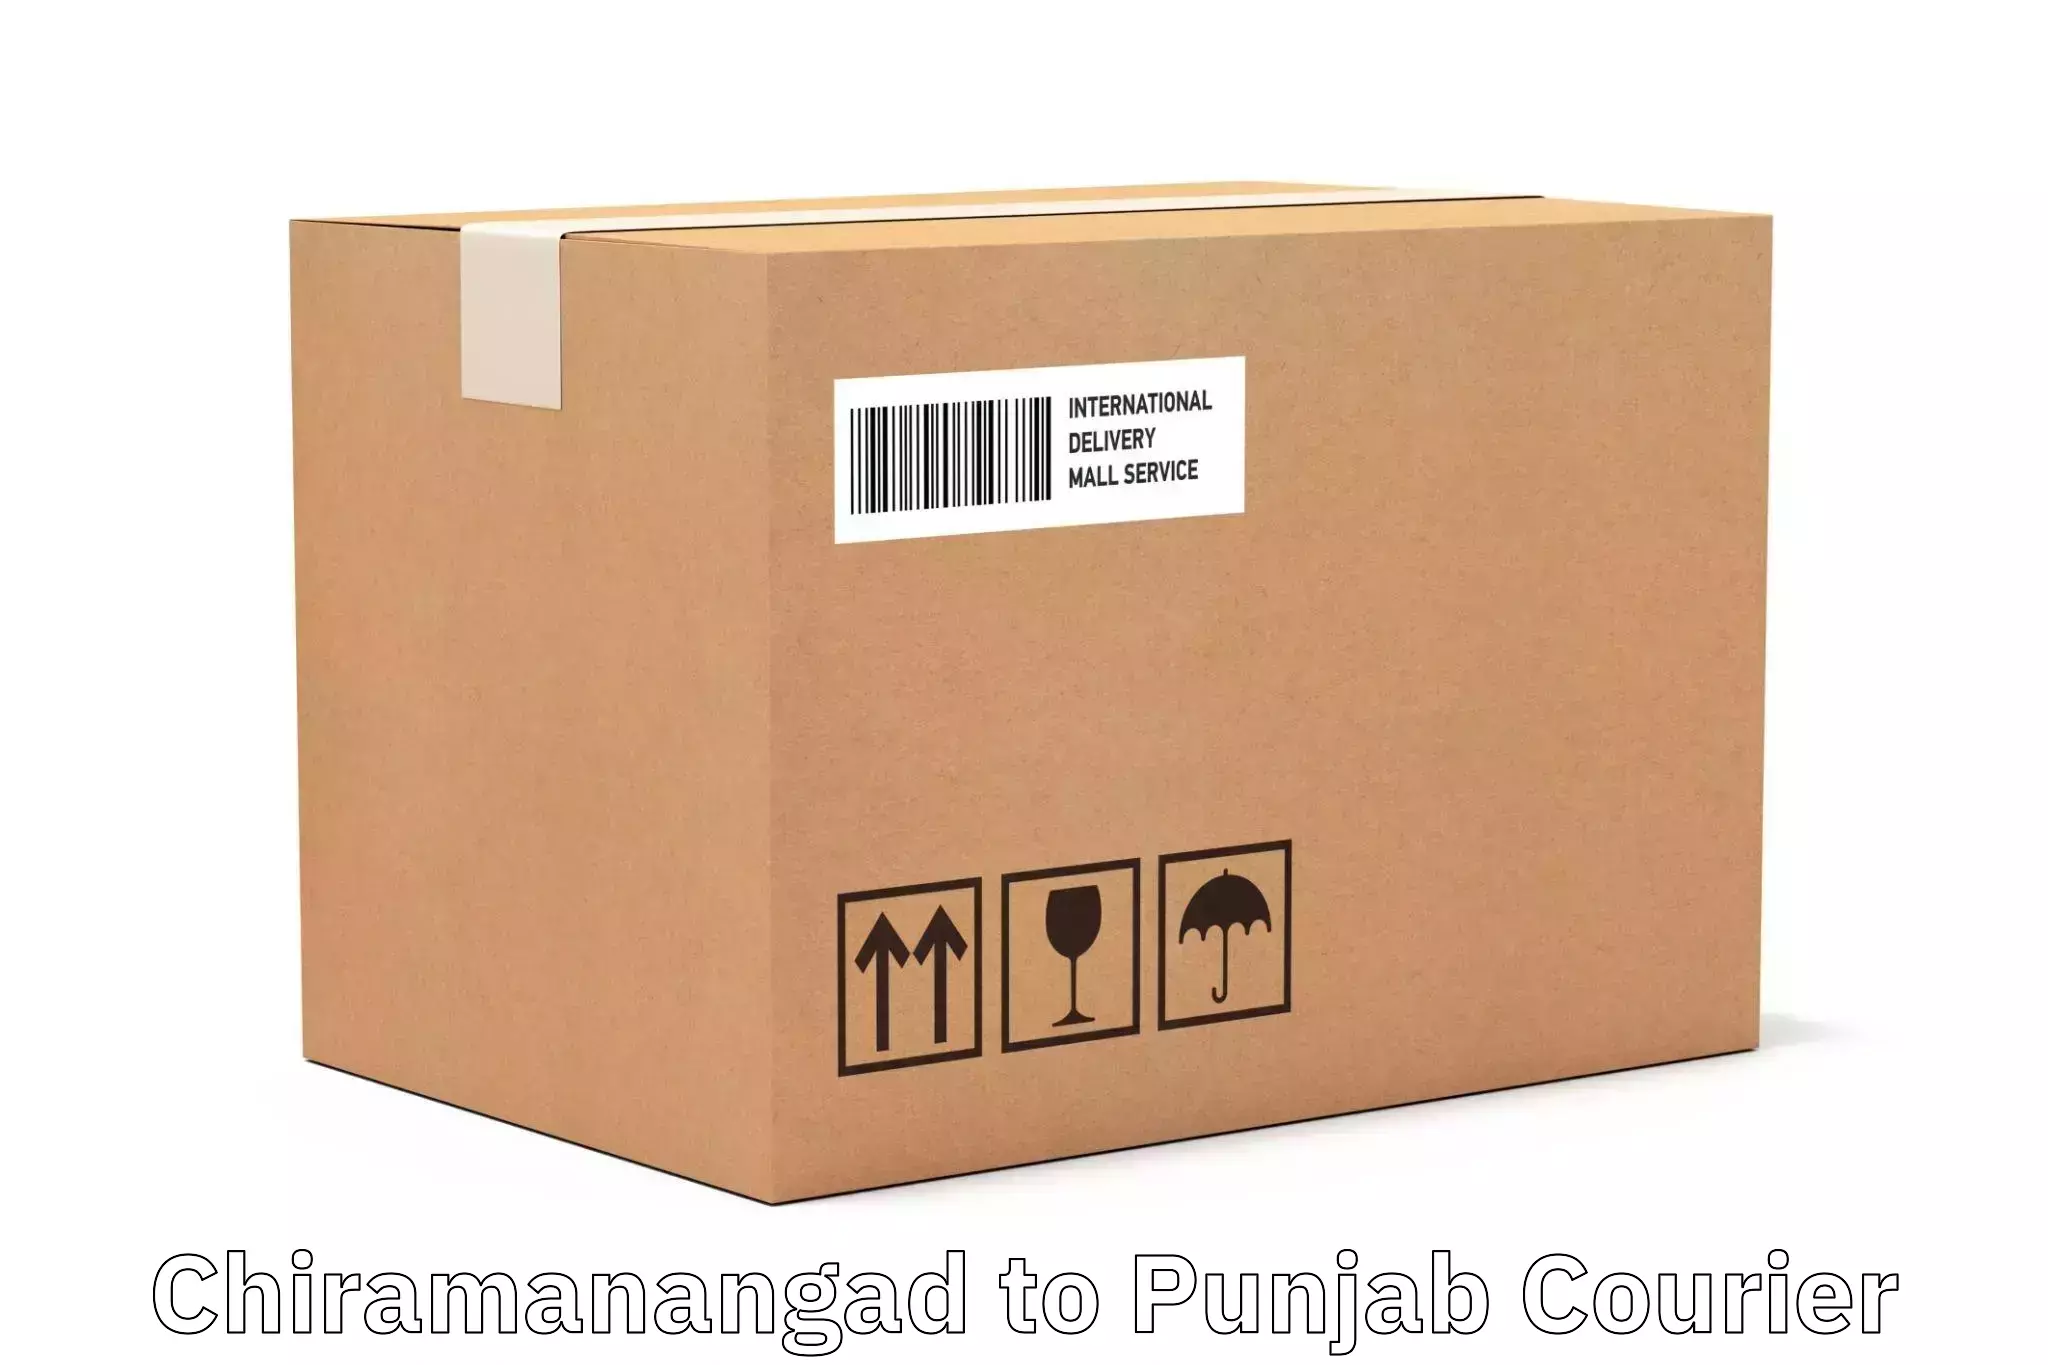 Ocean freight courier Chiramanangad to Mohali